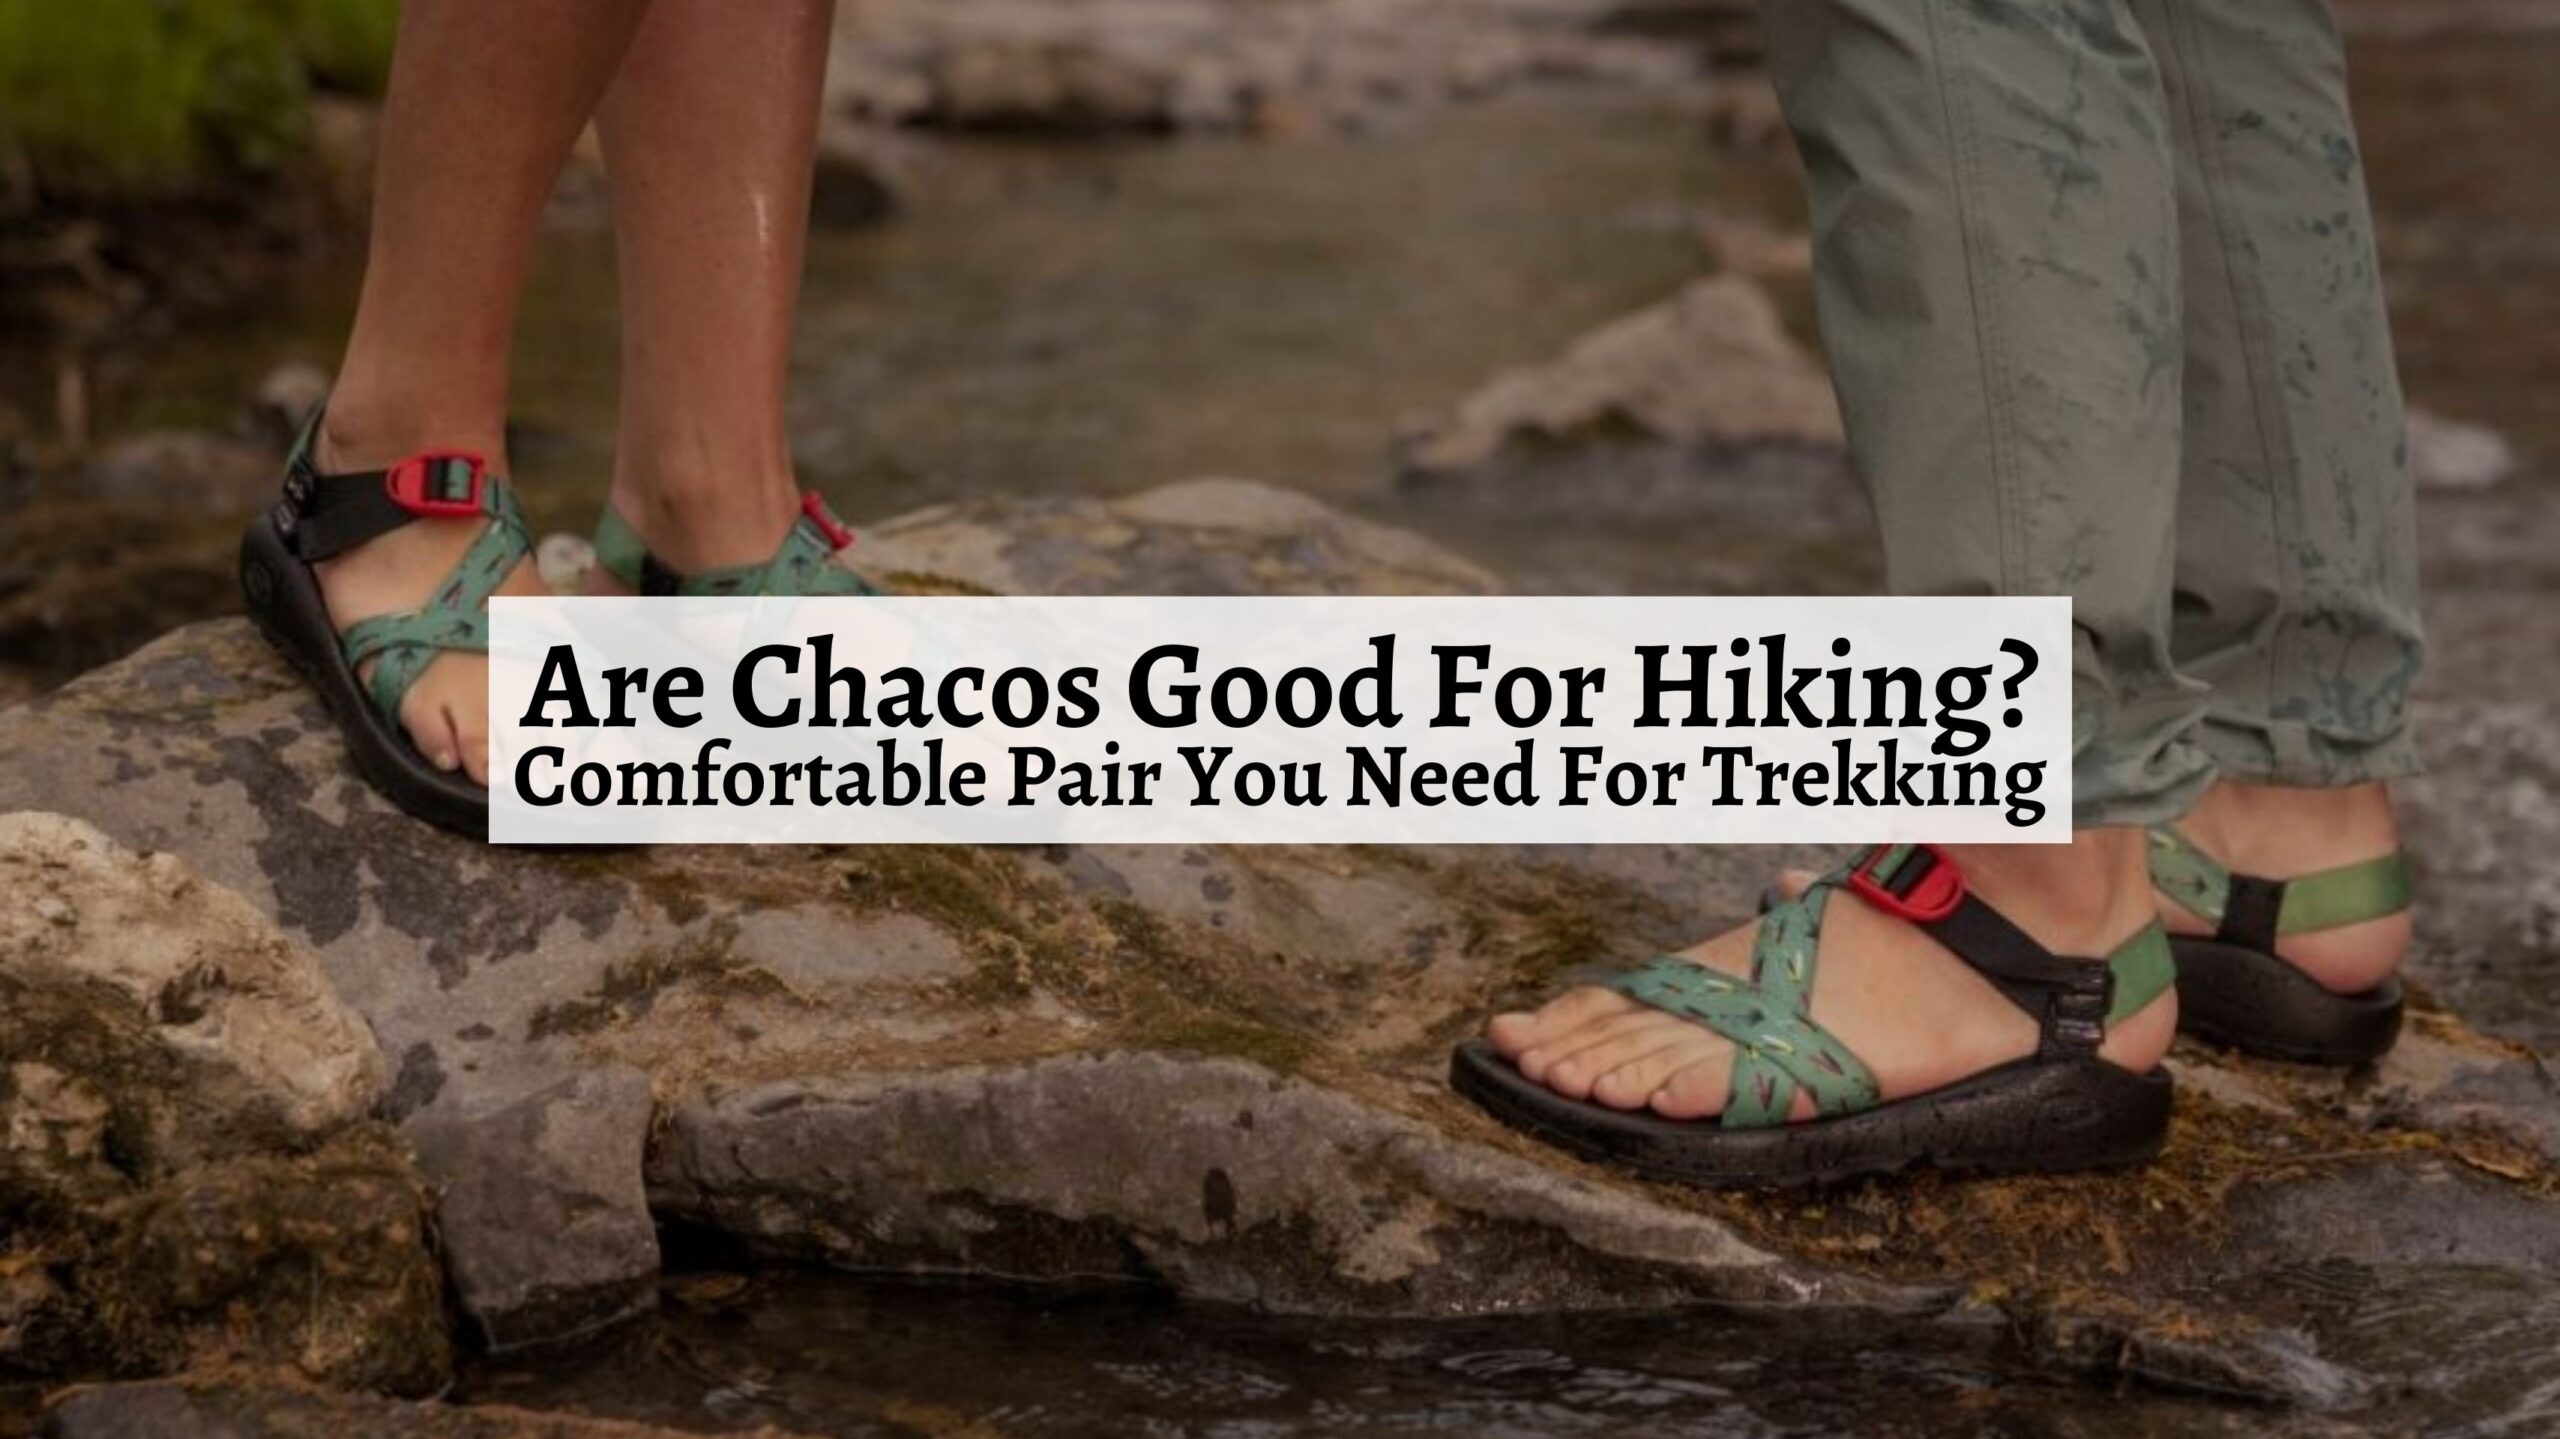 Are Chacos Good For Hiking? Comfortable Pair You Need For Trekking ...